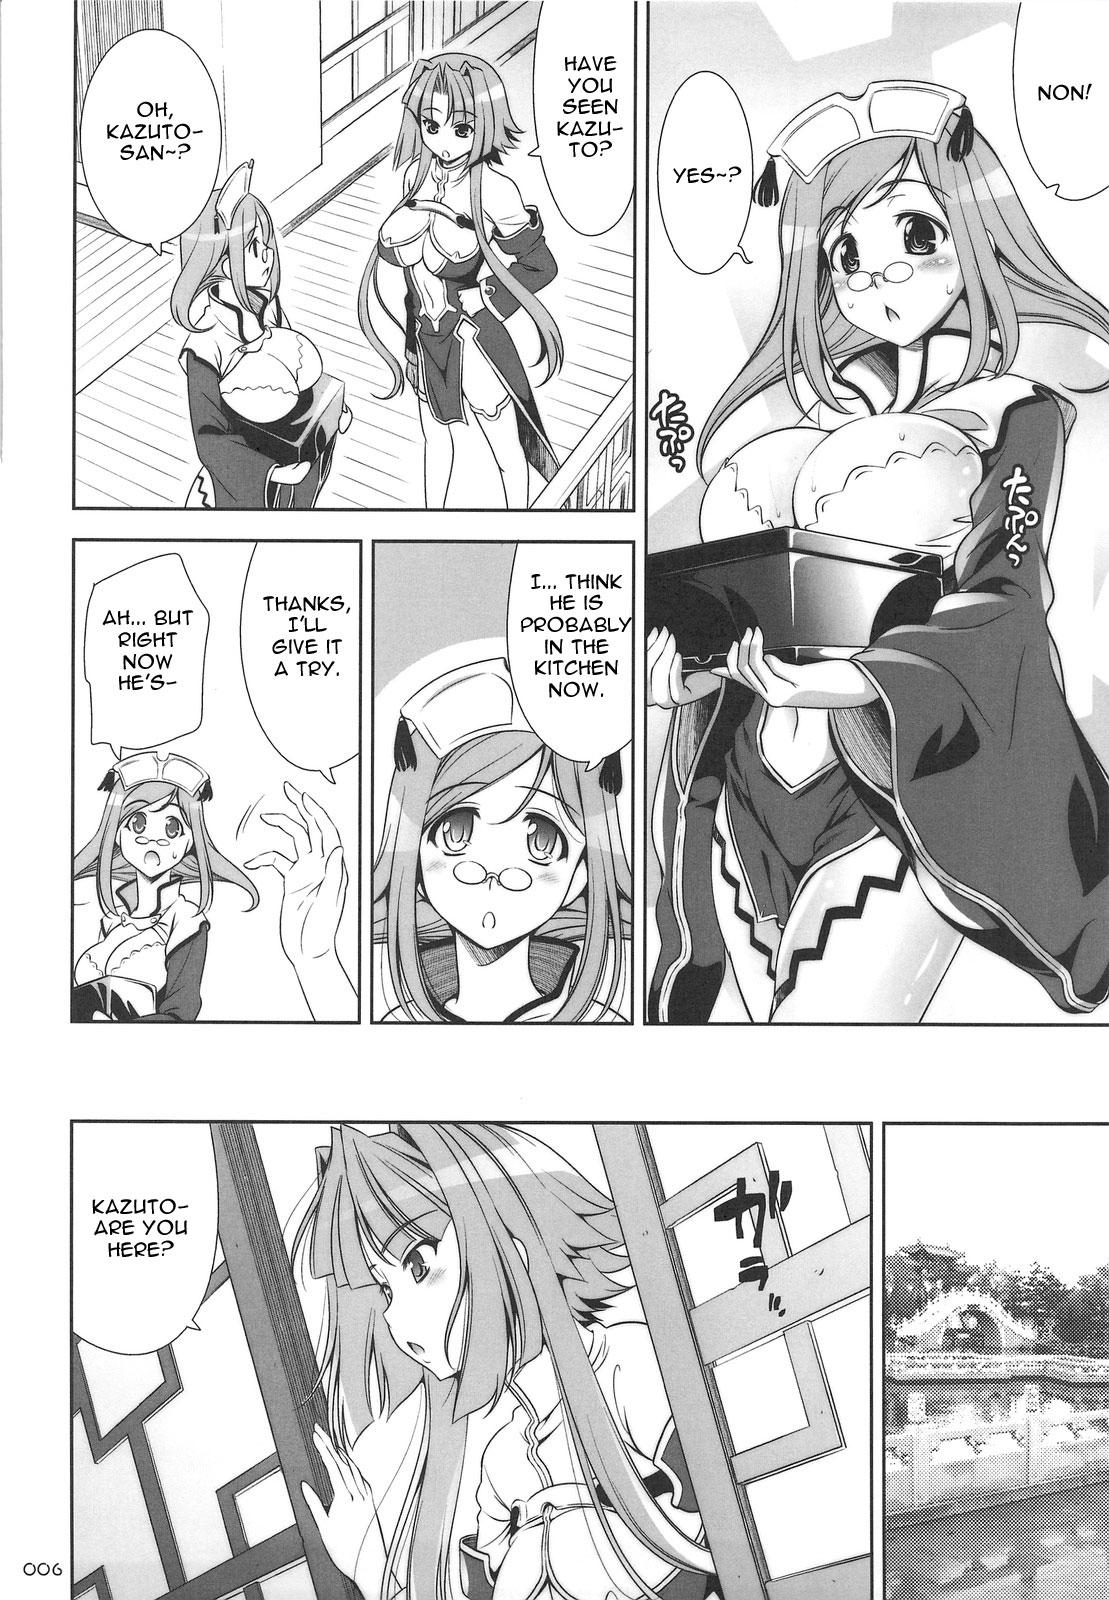 Dildo Fucking GO! My Way - Koihime musou Shavedpussy - Page 5